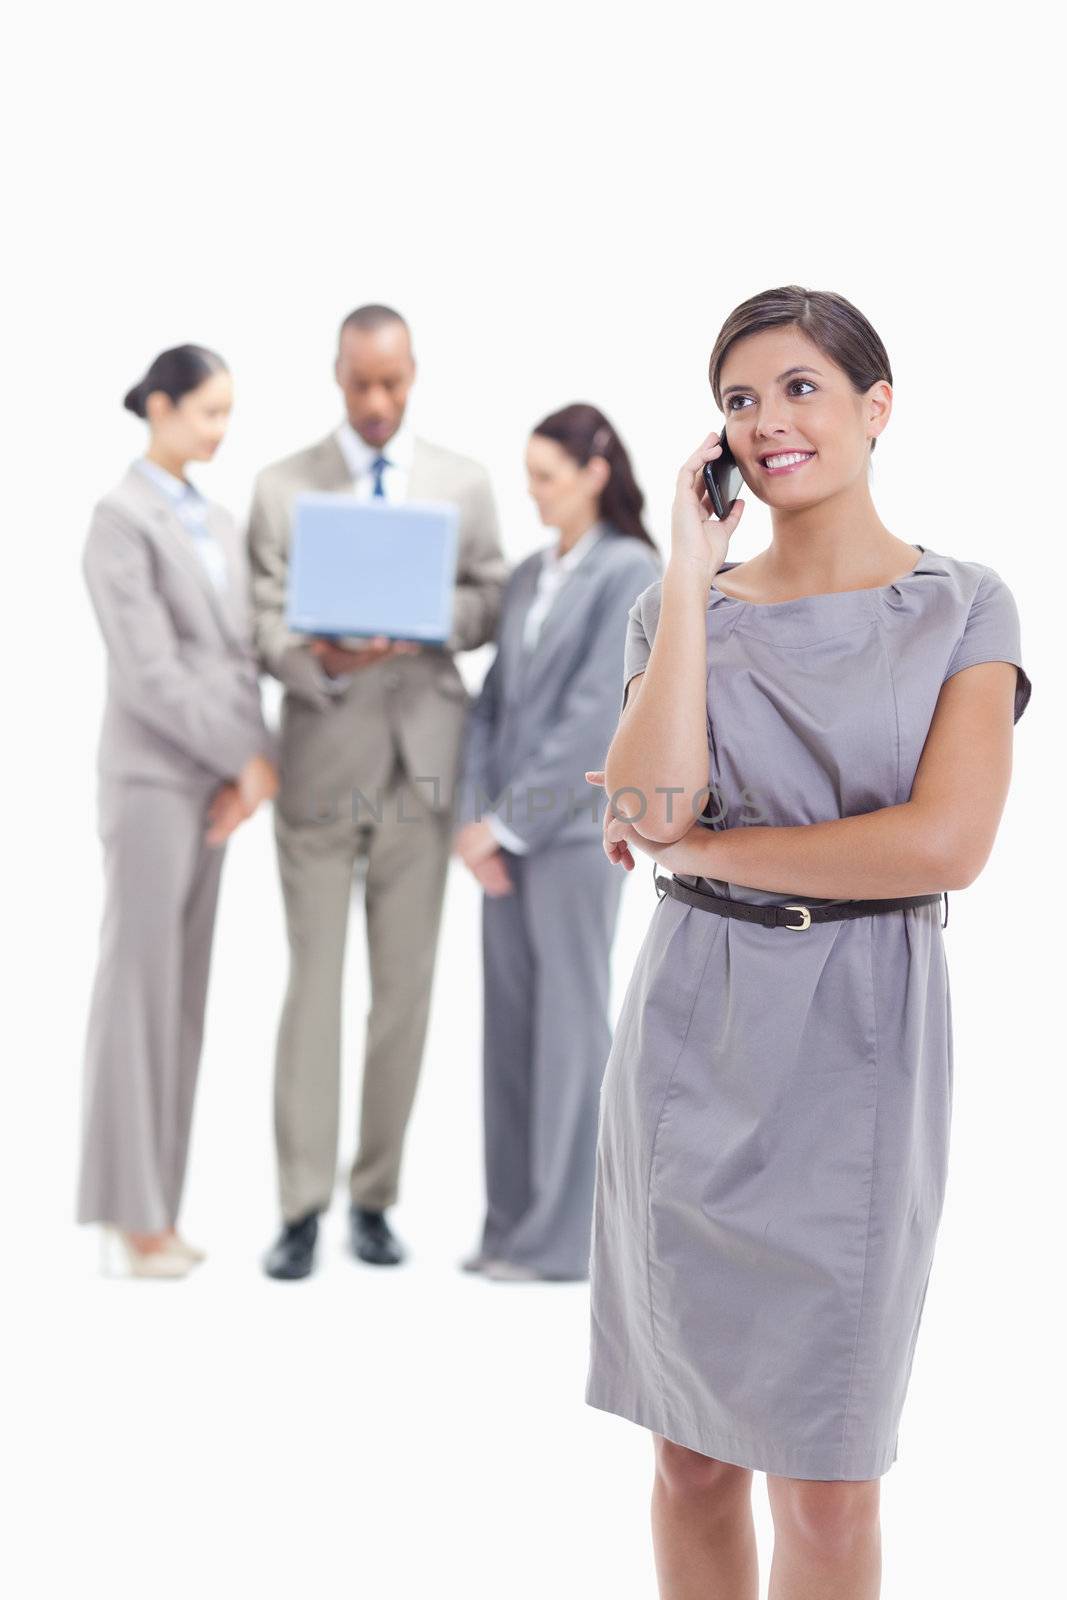 Businesswoman looking up on the phone with co-workers in the bac by Wavebreakmedia